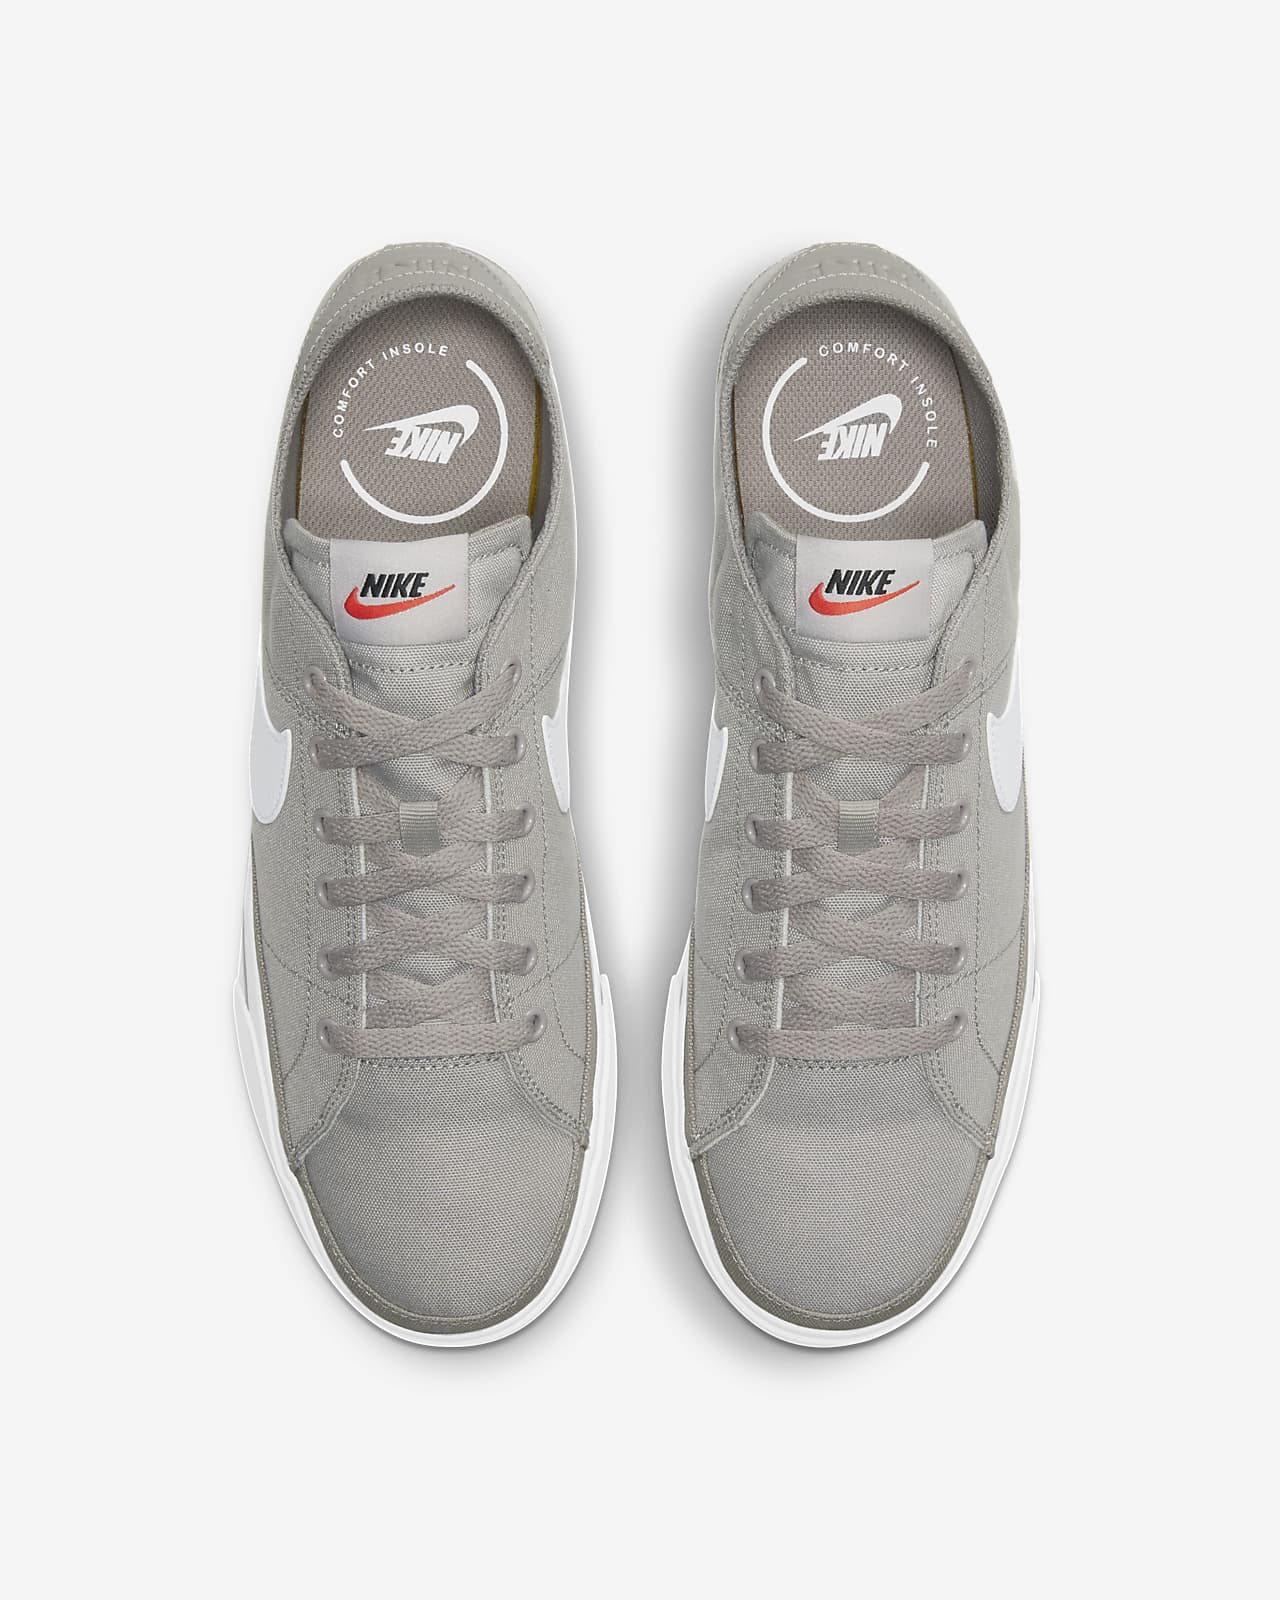 nike grey canvas shoes